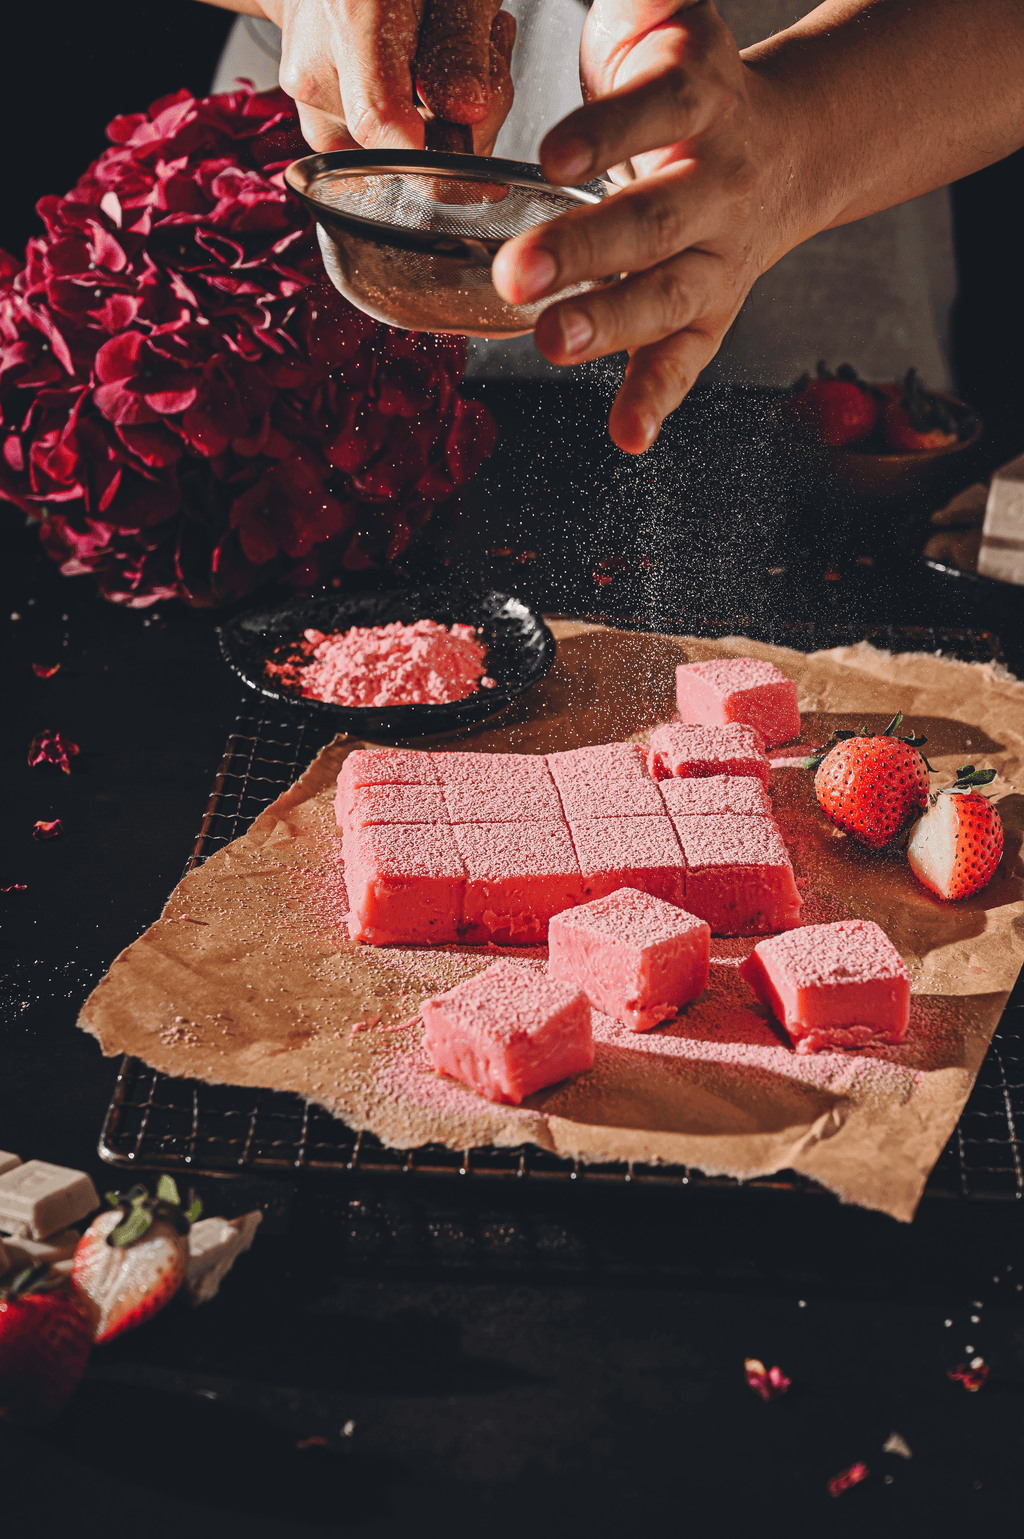 Discover why our NAMA Chocolate Strawberry is a one-of-a-kind artisan chocolate in Singapore.